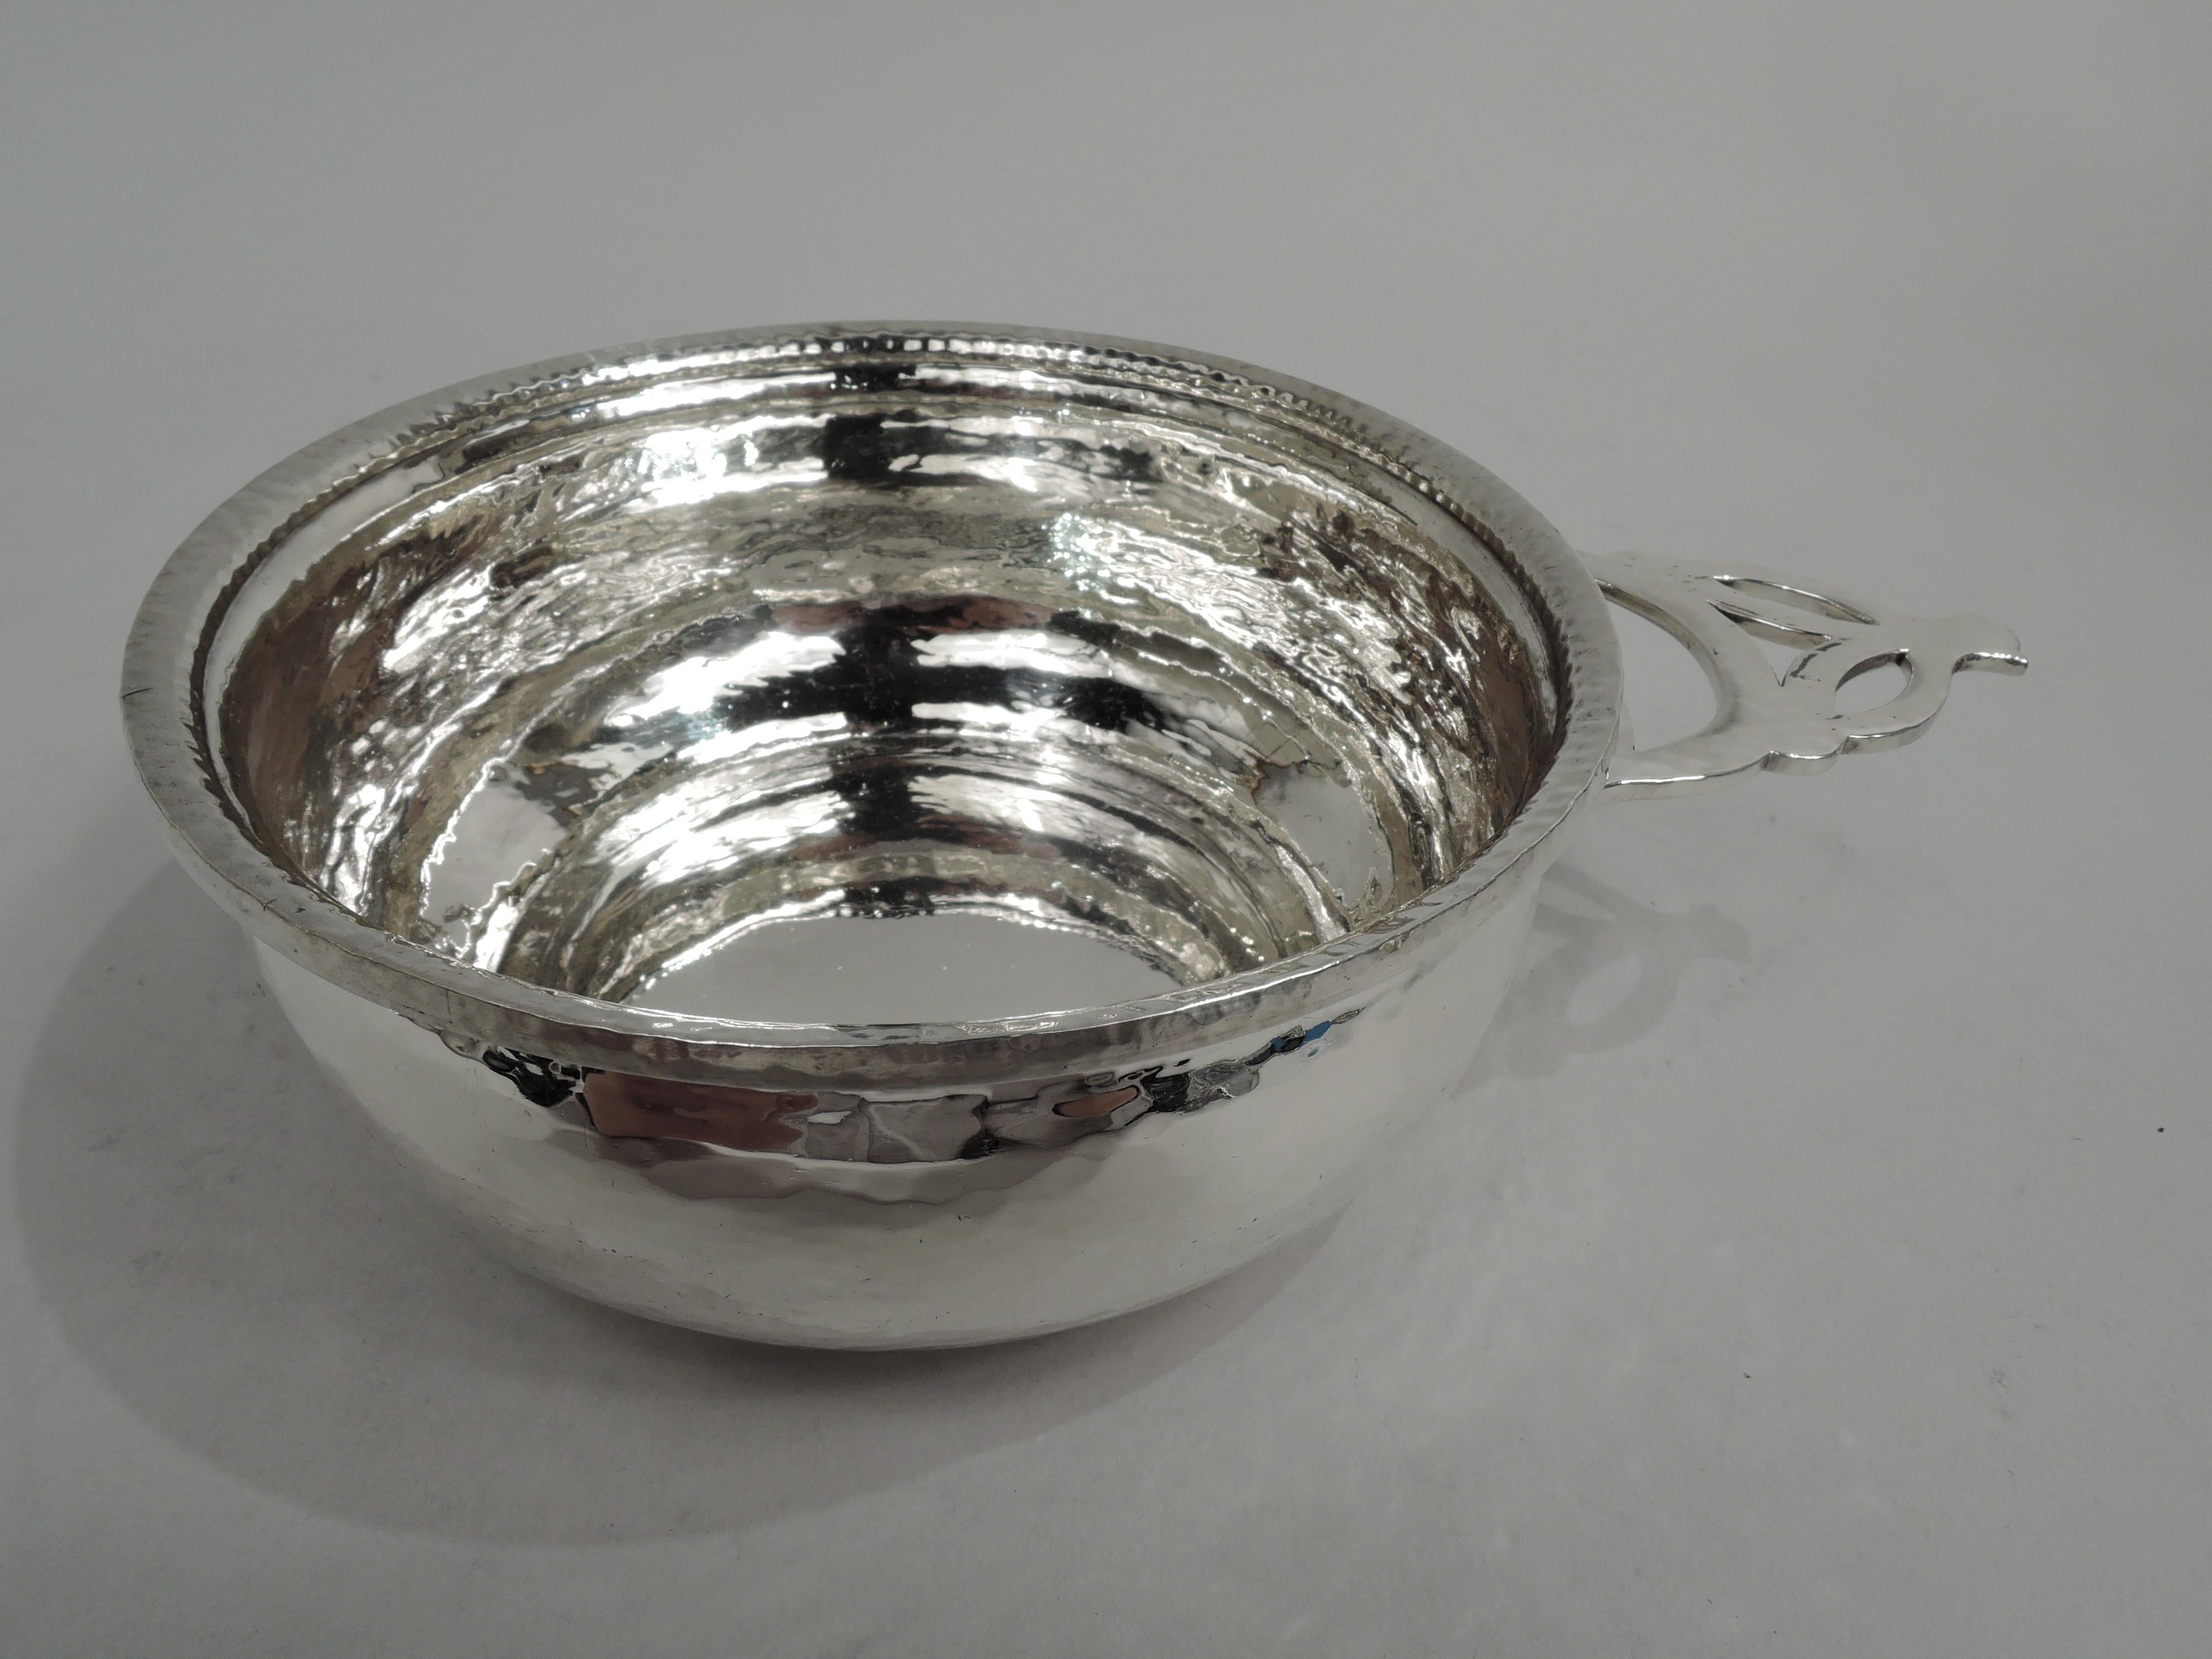 Craftsman sterling silver porringer. Made by Gorham in Providence, ca 1910. Traditional form. Unusual open geometric handle. Allover spot hammering. Fully marked including maker’s stamp and no. A5235. Weight: 7.8 troy ounces.